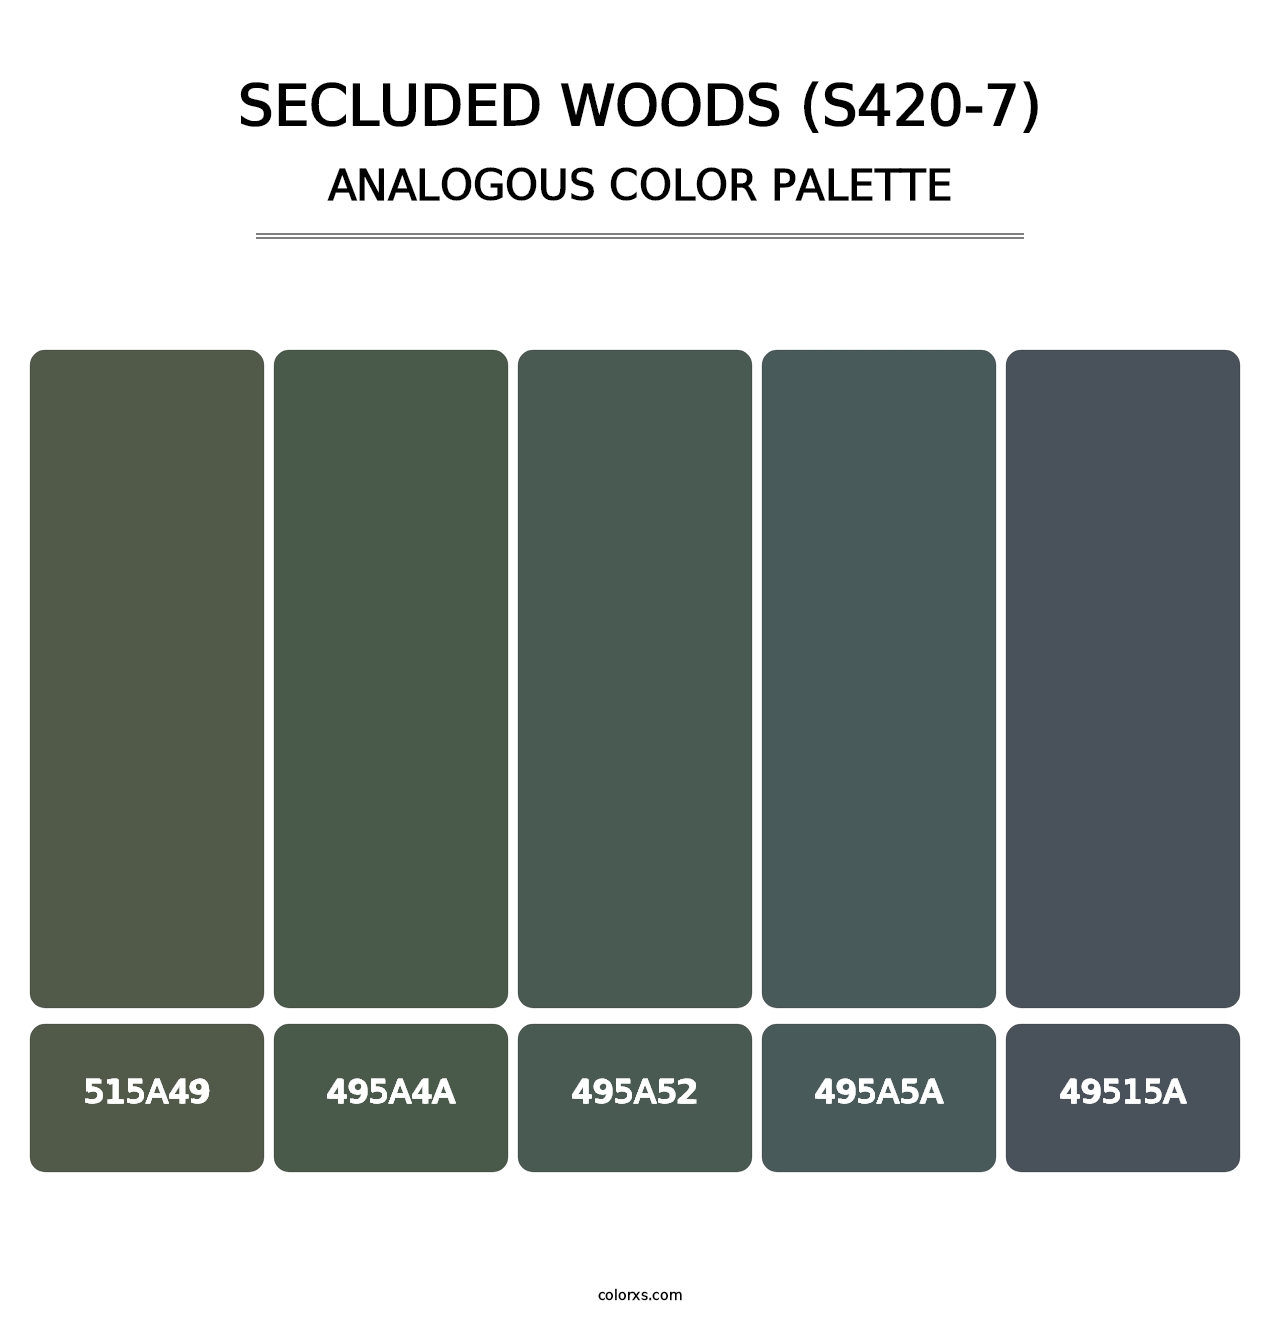 Secluded Woods (S420-7) - Analogous Color Palette